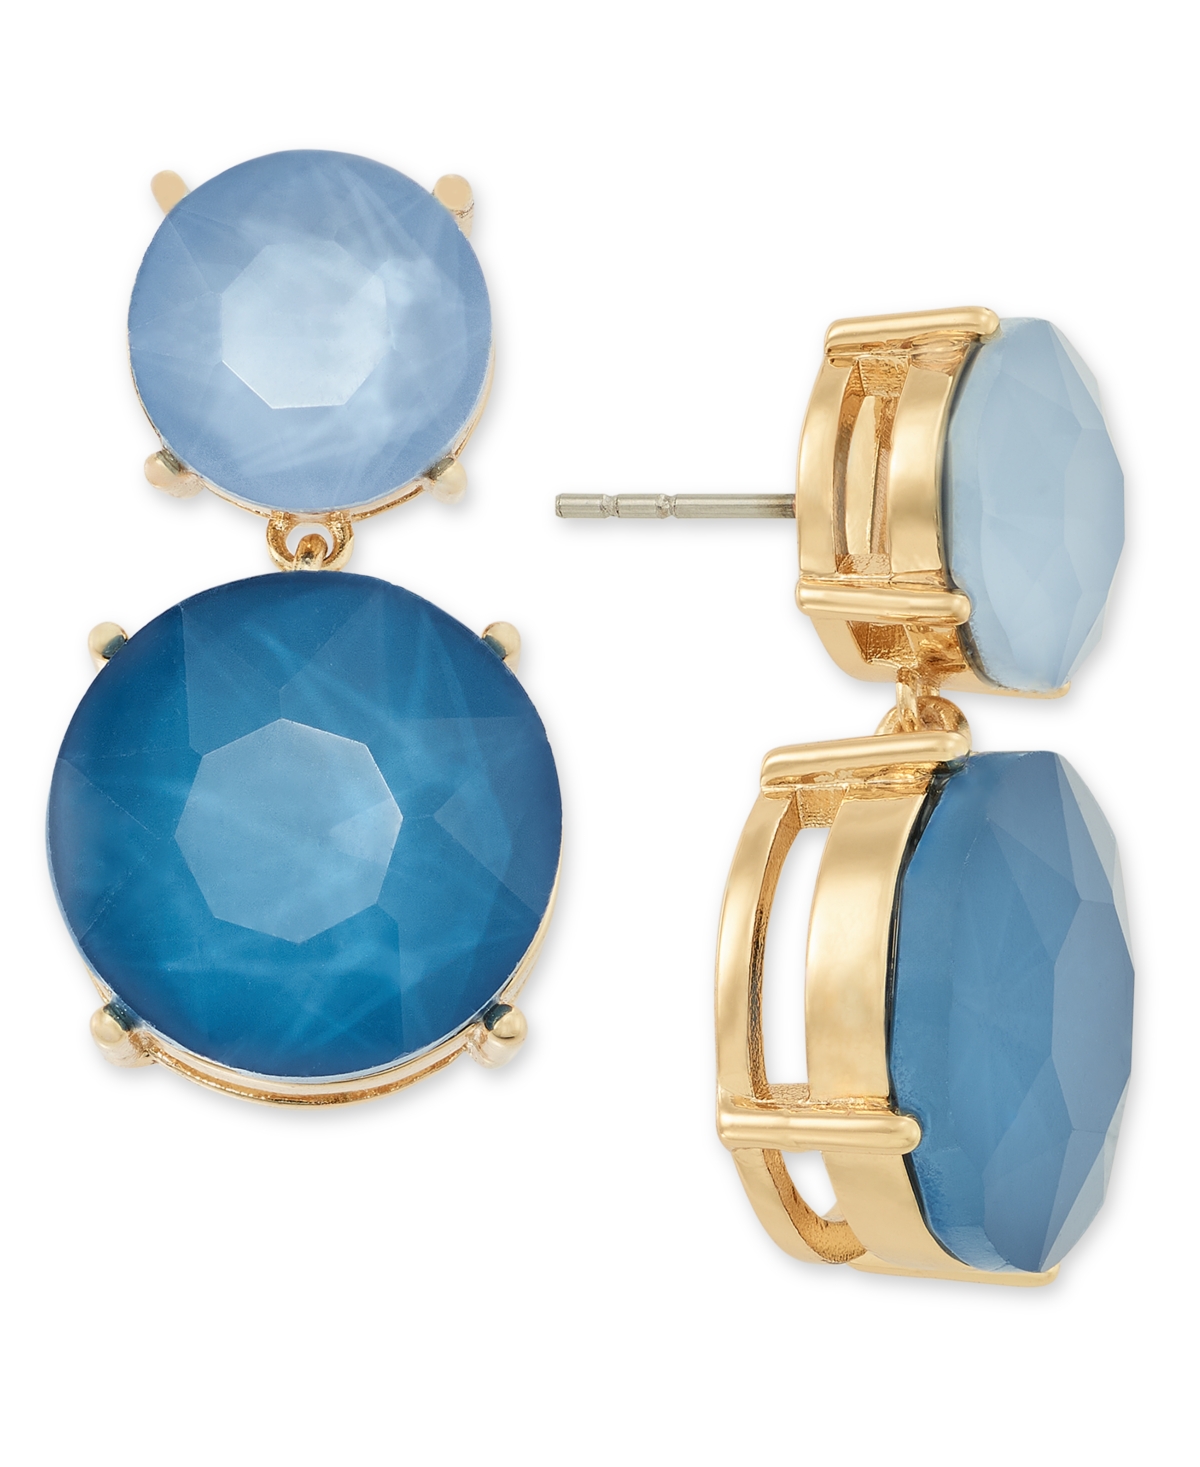 Gold-Tone Stone Double Drop Earrings, Created for Macy's - Blue